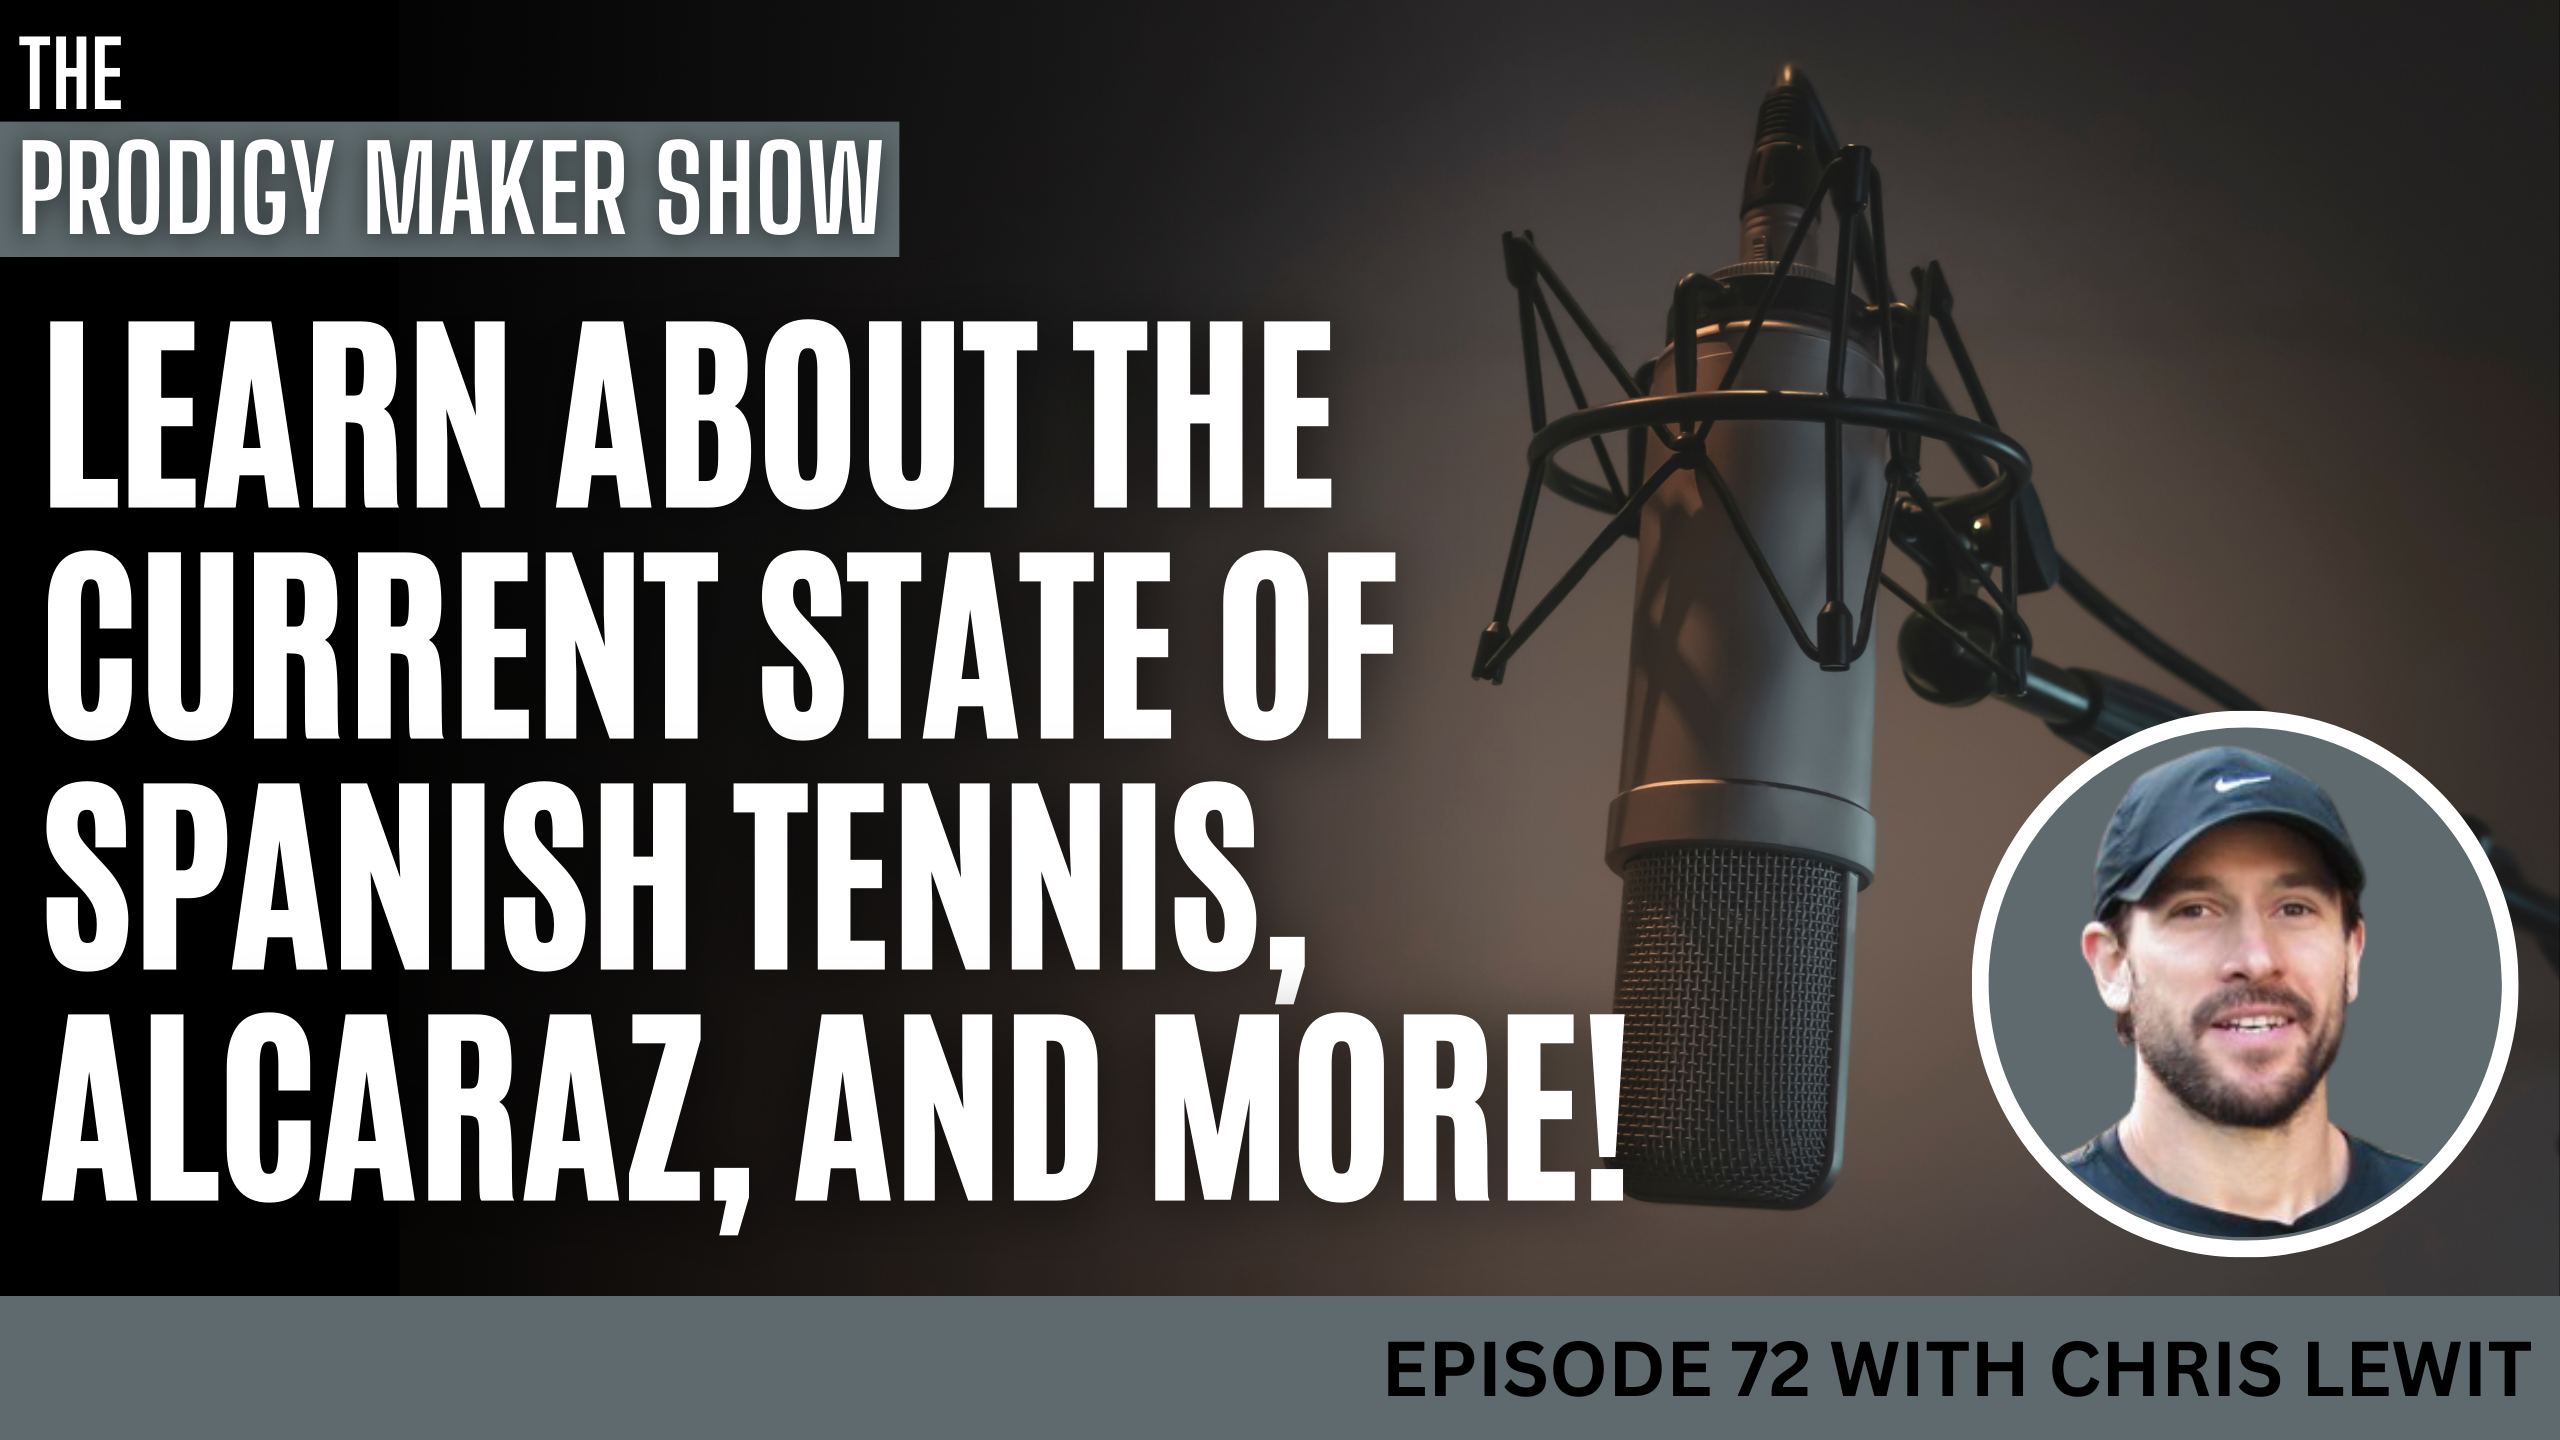 Learn About The Current State of Spanish Tennis, Alcaraz, and More! - Prodigy Maker Show Episode 72